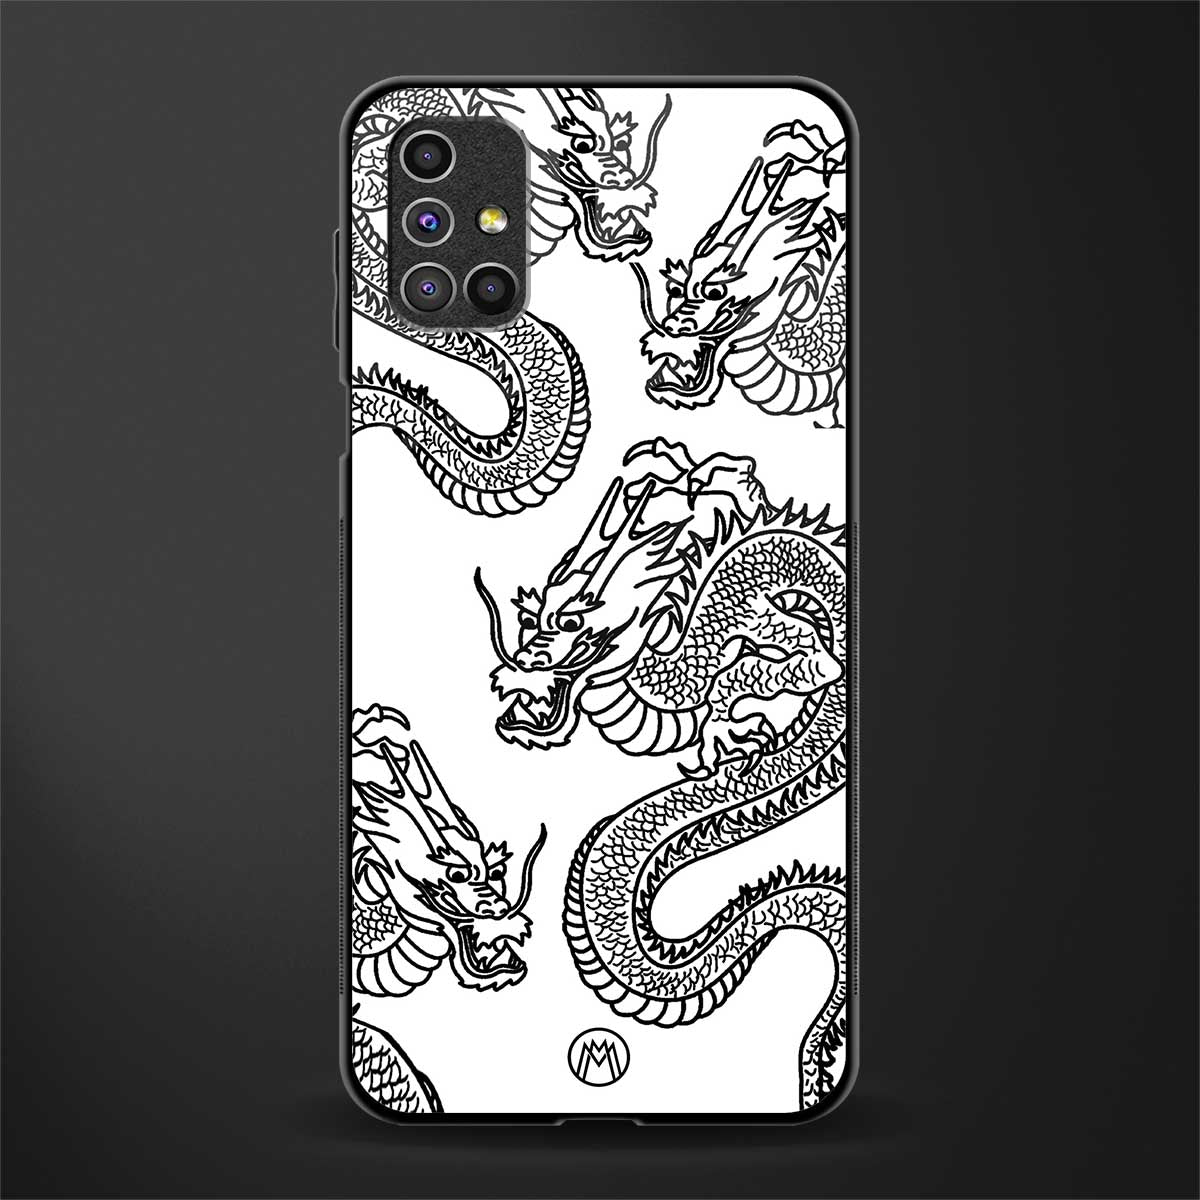 dragons lite glass case for samsung galaxy m31s image